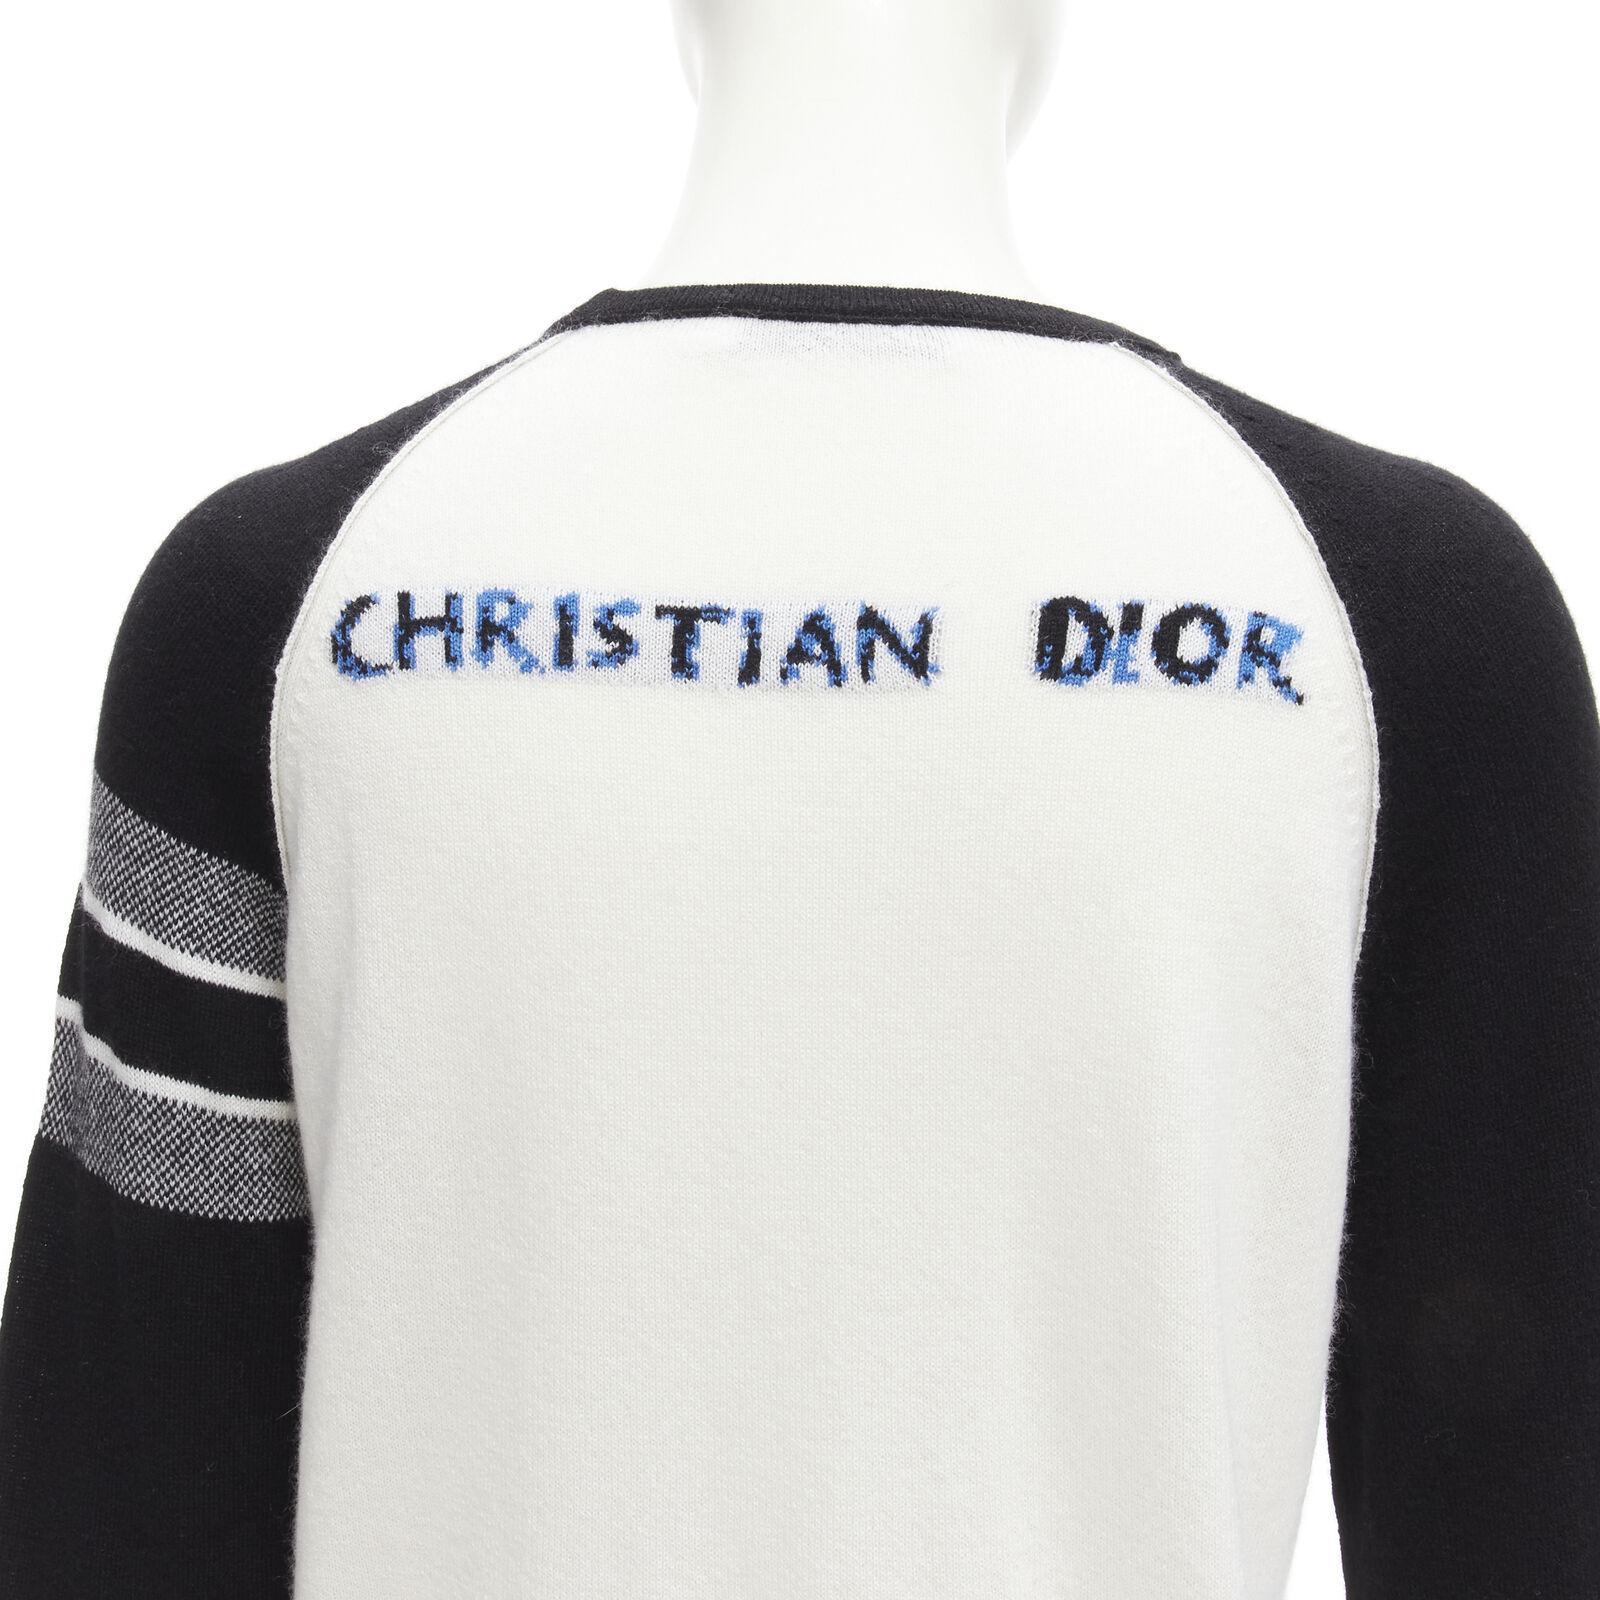 CHRISTIAN DIOR 2021 100% cashmere Heart Beat black white raglan top FR34 XS
Reference: AAWC/A00237
Brand: Christian Dior
Designer: Maria Grazia Chiuri
Collection: 2021 Heart Beat
Material: 100% Cashmere
Color: White, Multicolour
Pattern: Heart
Extra